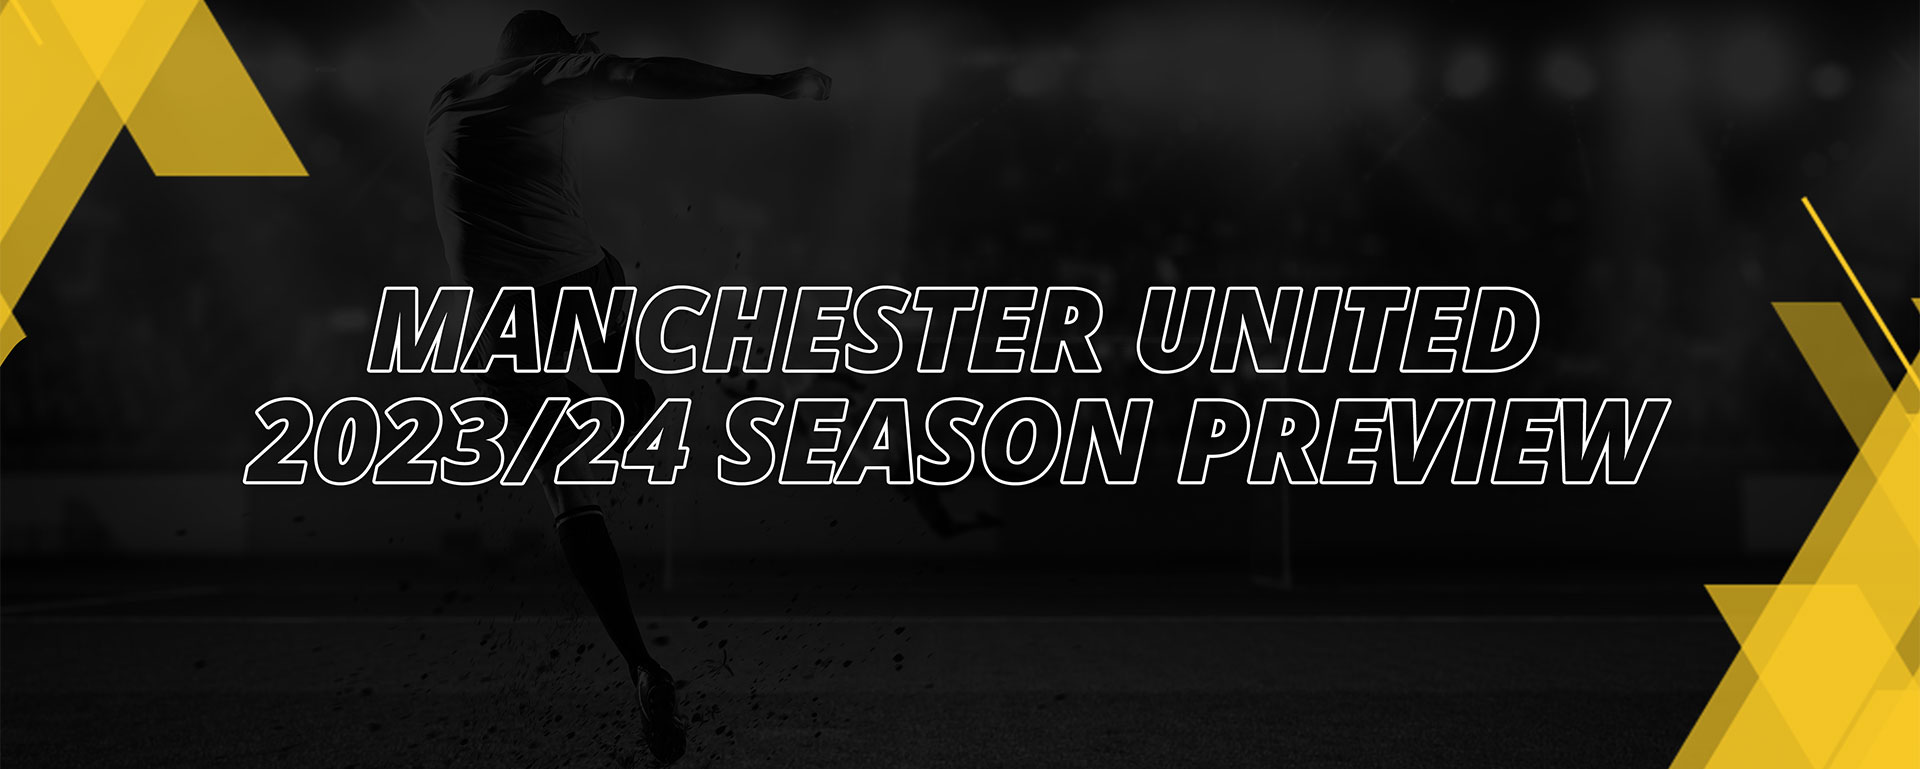 MANCHESTER UNITED 2023/24 SEASON PREVIEW